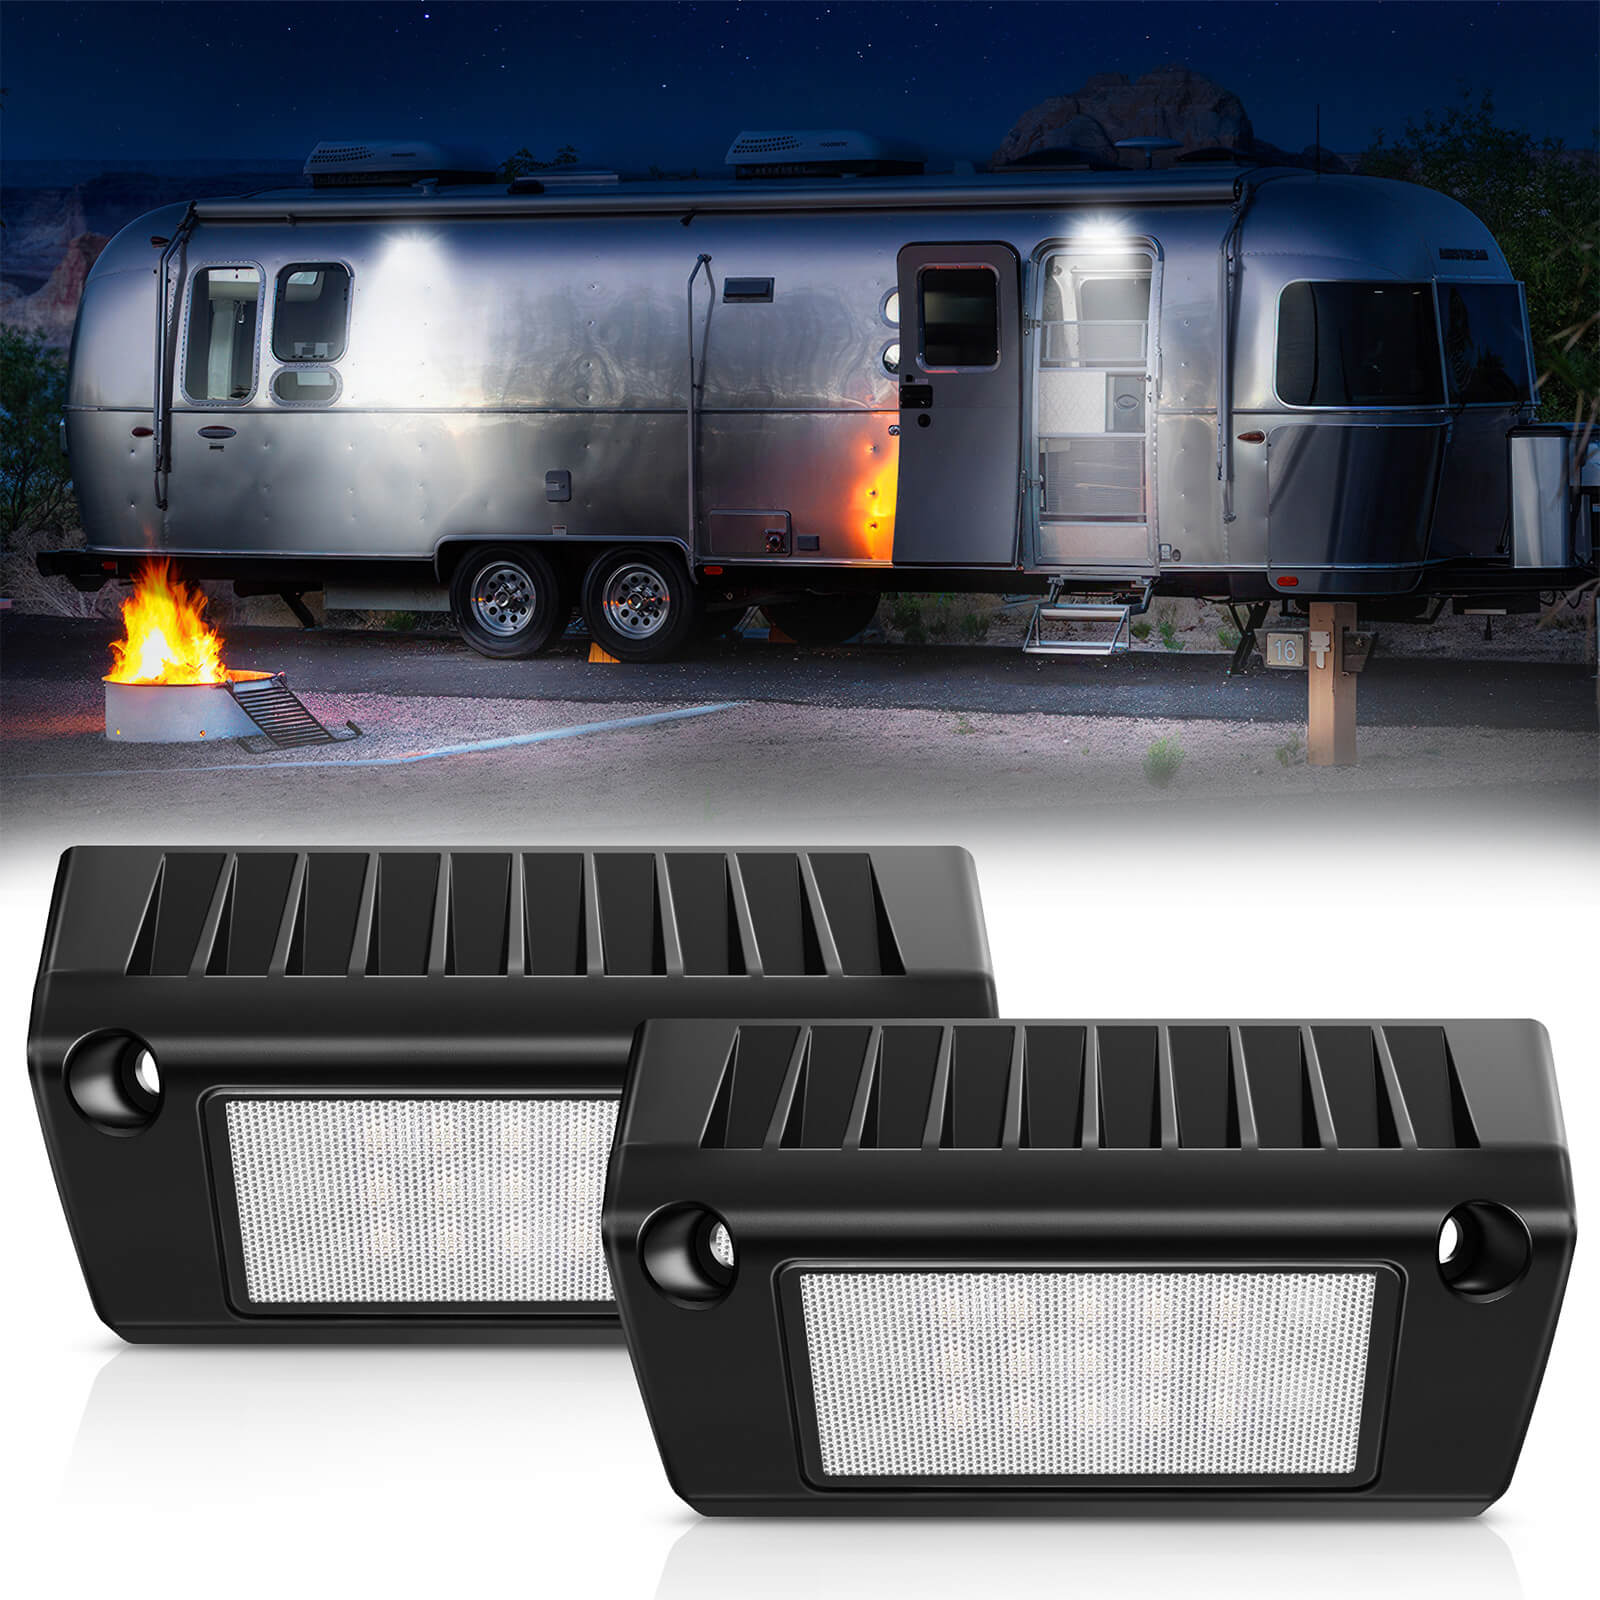 Upgraded 2pcs RV Porch Lights 5 Inch 45W LED Exterior Utility Awning Light 2000LM 6000K, Aluminum Housing IP67 Waterproof